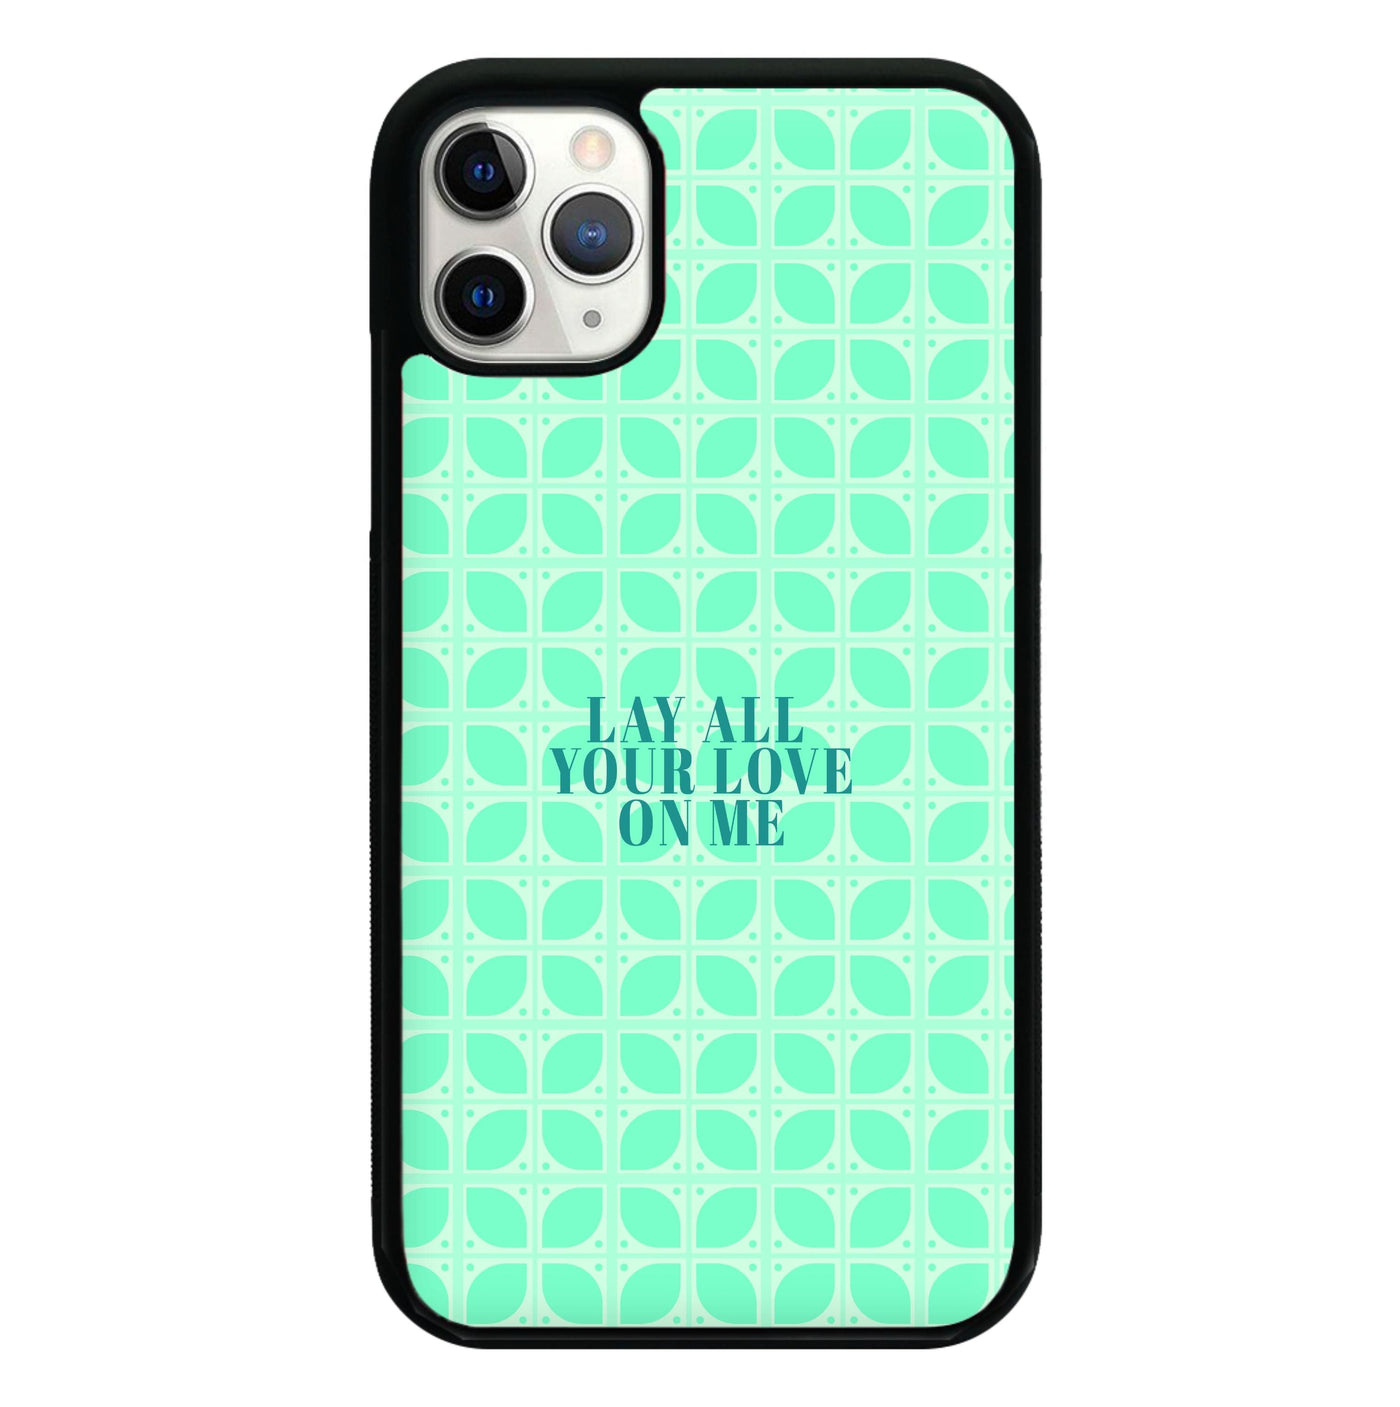 Lay All Your Love On Me - Mamma Mia Phone Case